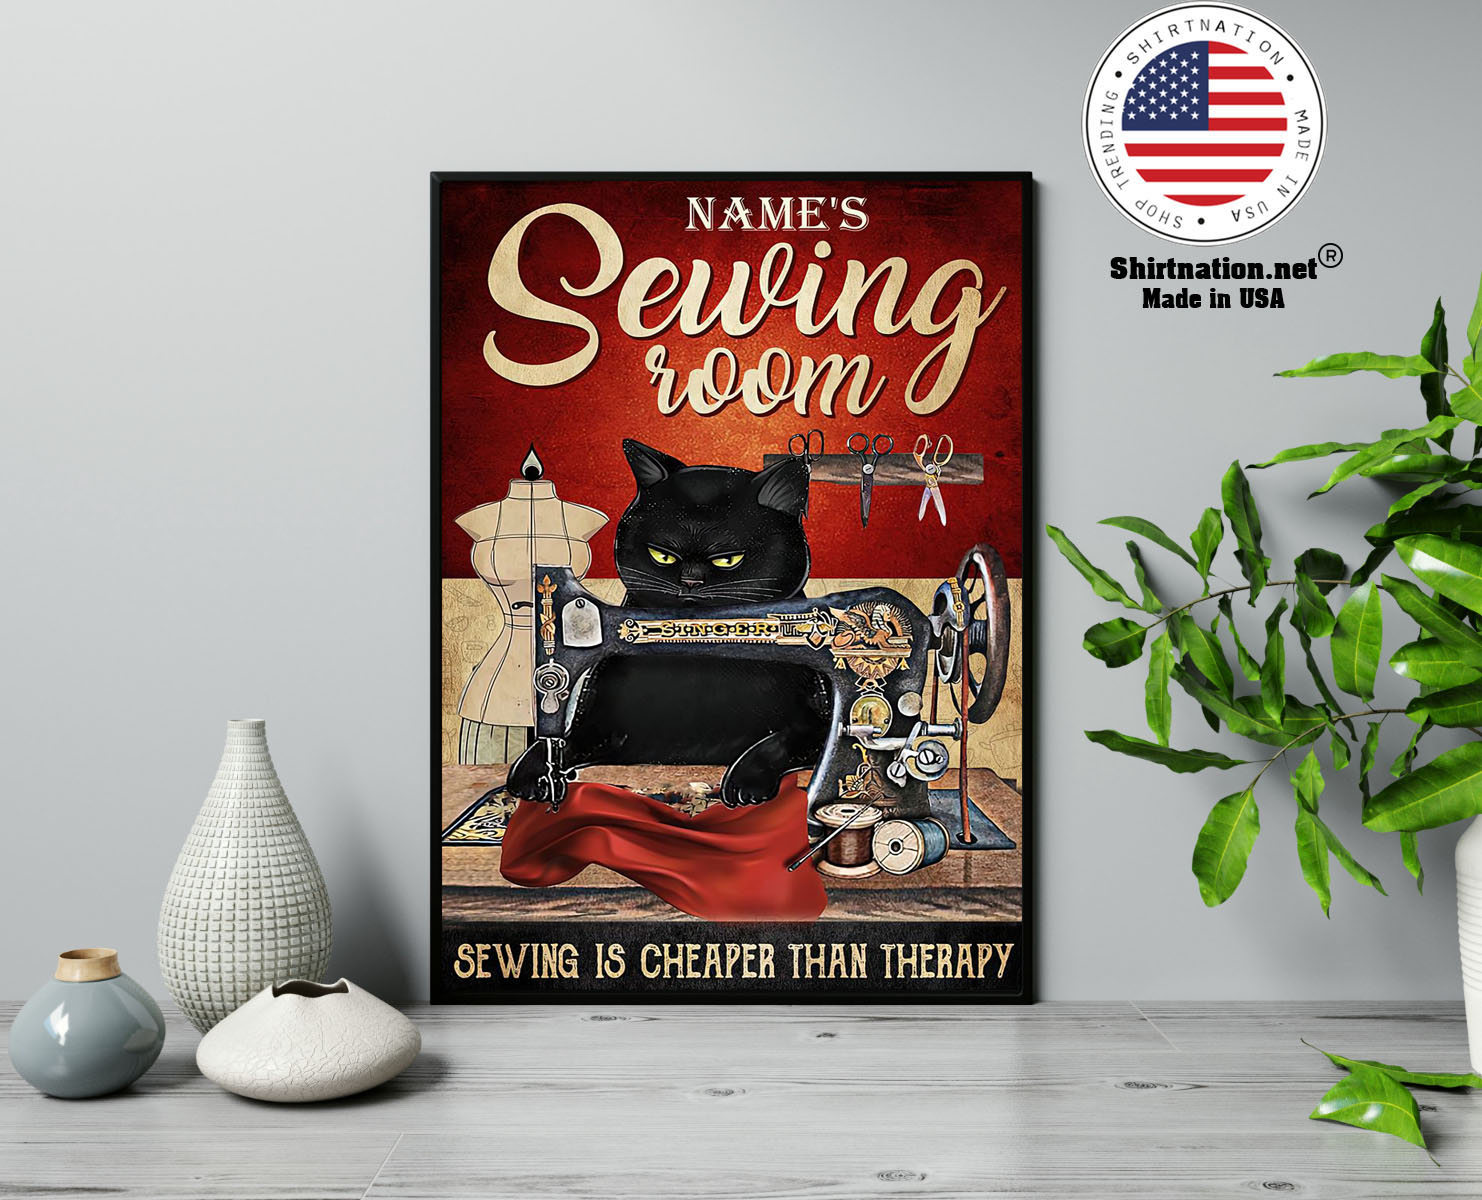 Sewing room sewing is cheaper than therapy poster 13